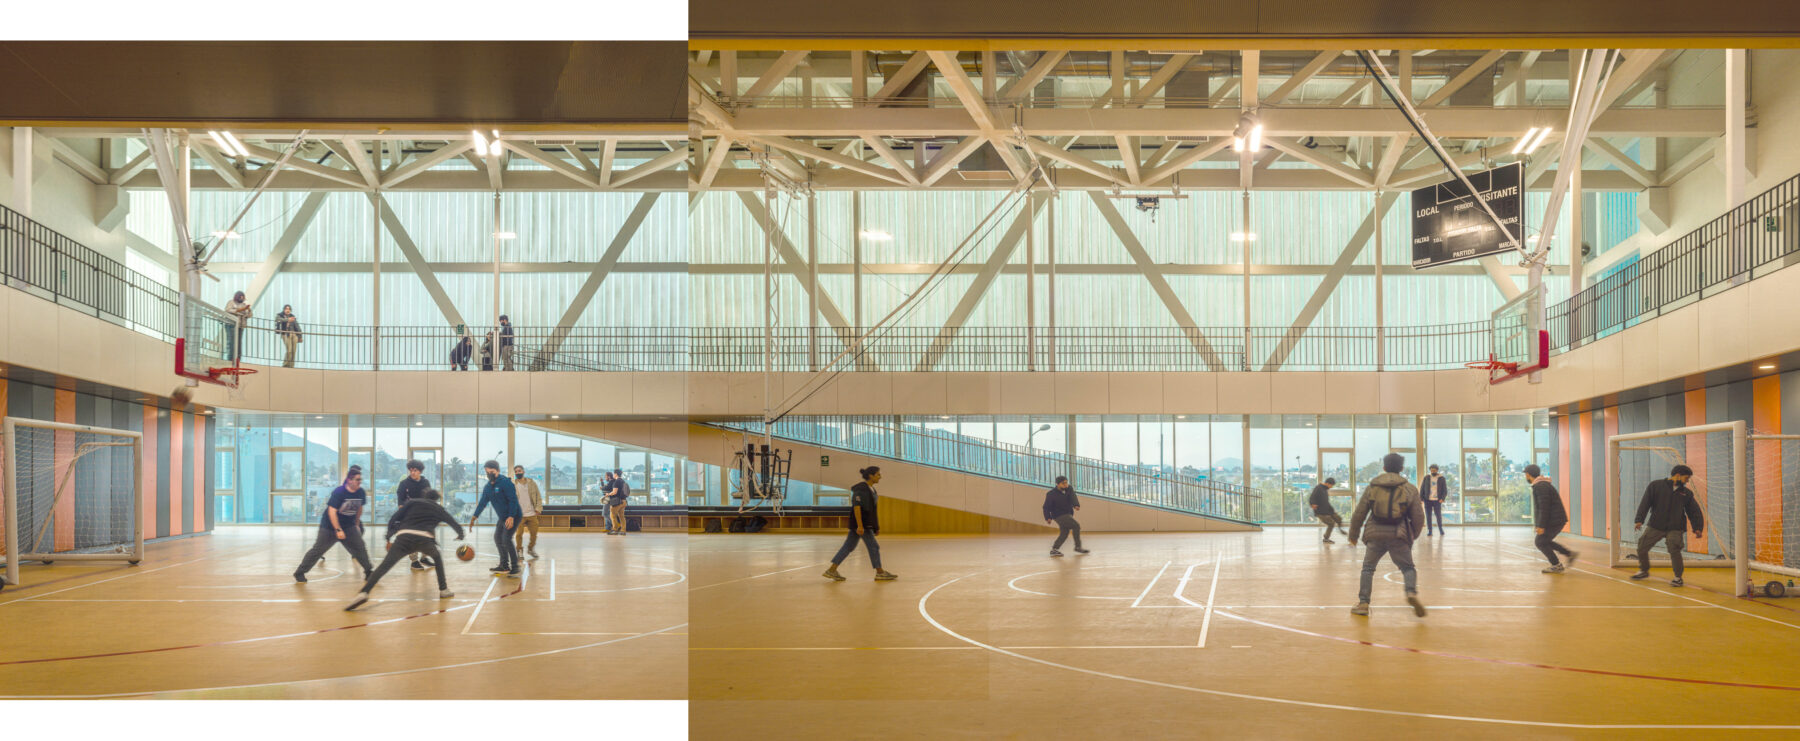 2 color photos stitched together to show a panorama of activity. Students play a game of futsol in the foreground. In the background the luminous facade yields a view of the city.